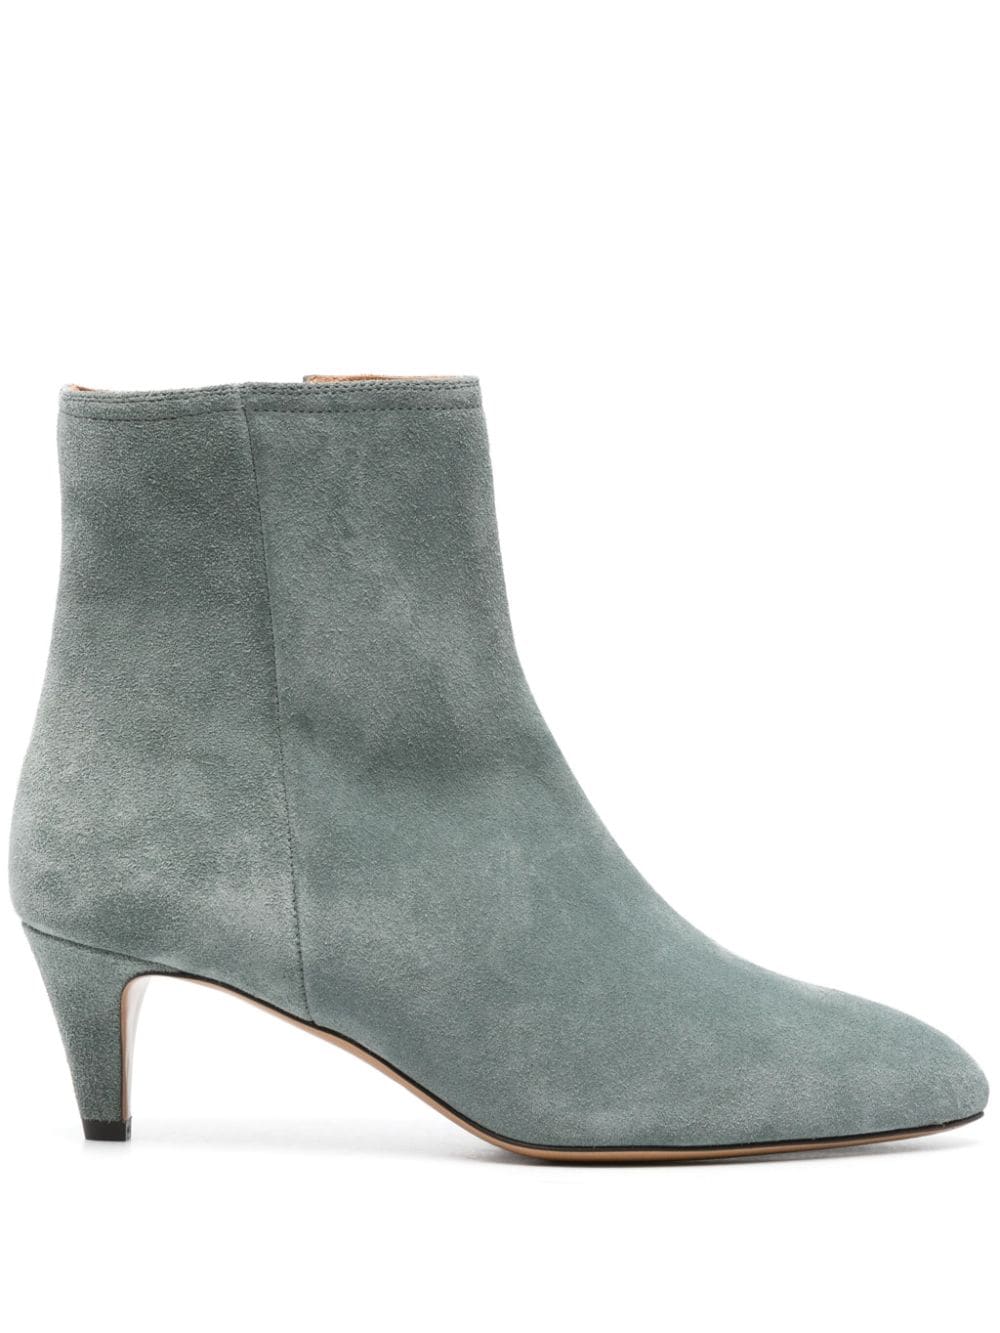 ISABEL MARANT Deone suede ankle boots - Green von ISABEL MARANT